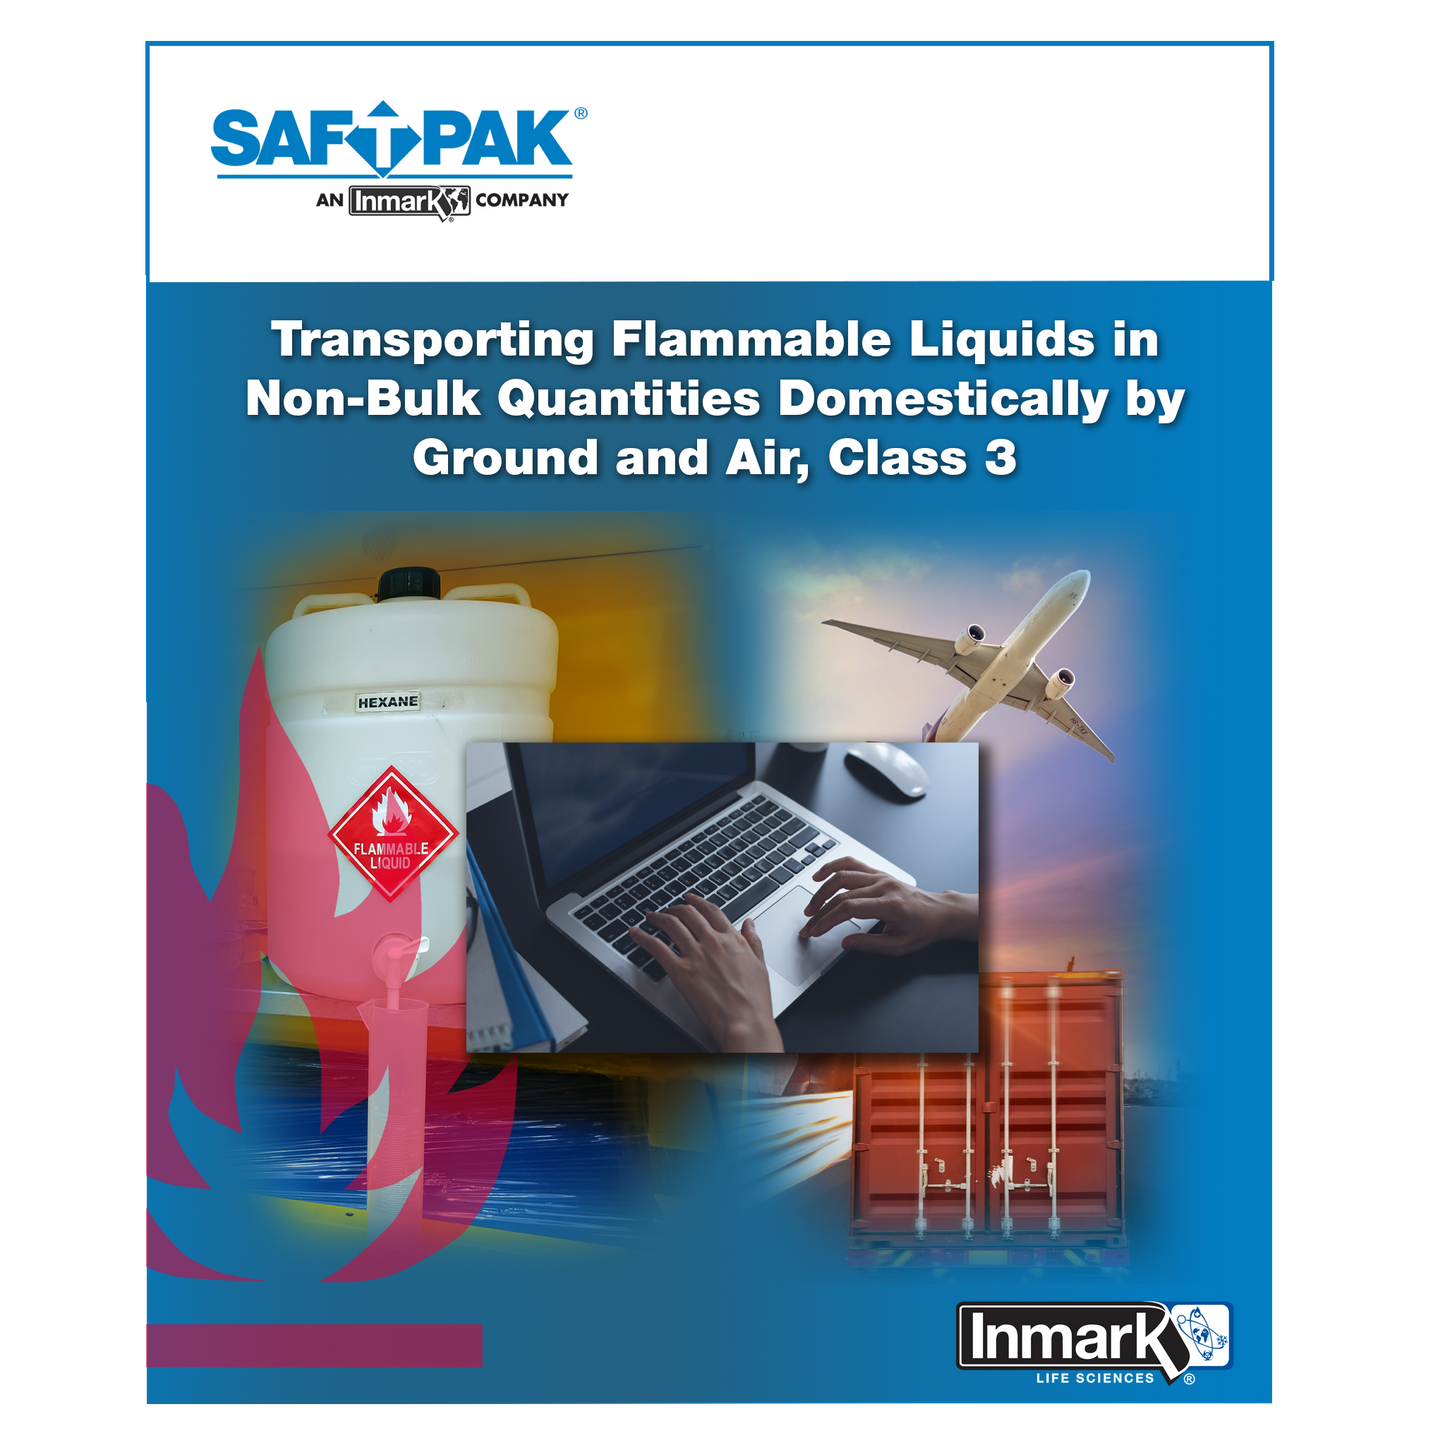 Training For Transporting Flammable Liquids in Non-Bulk Quantities